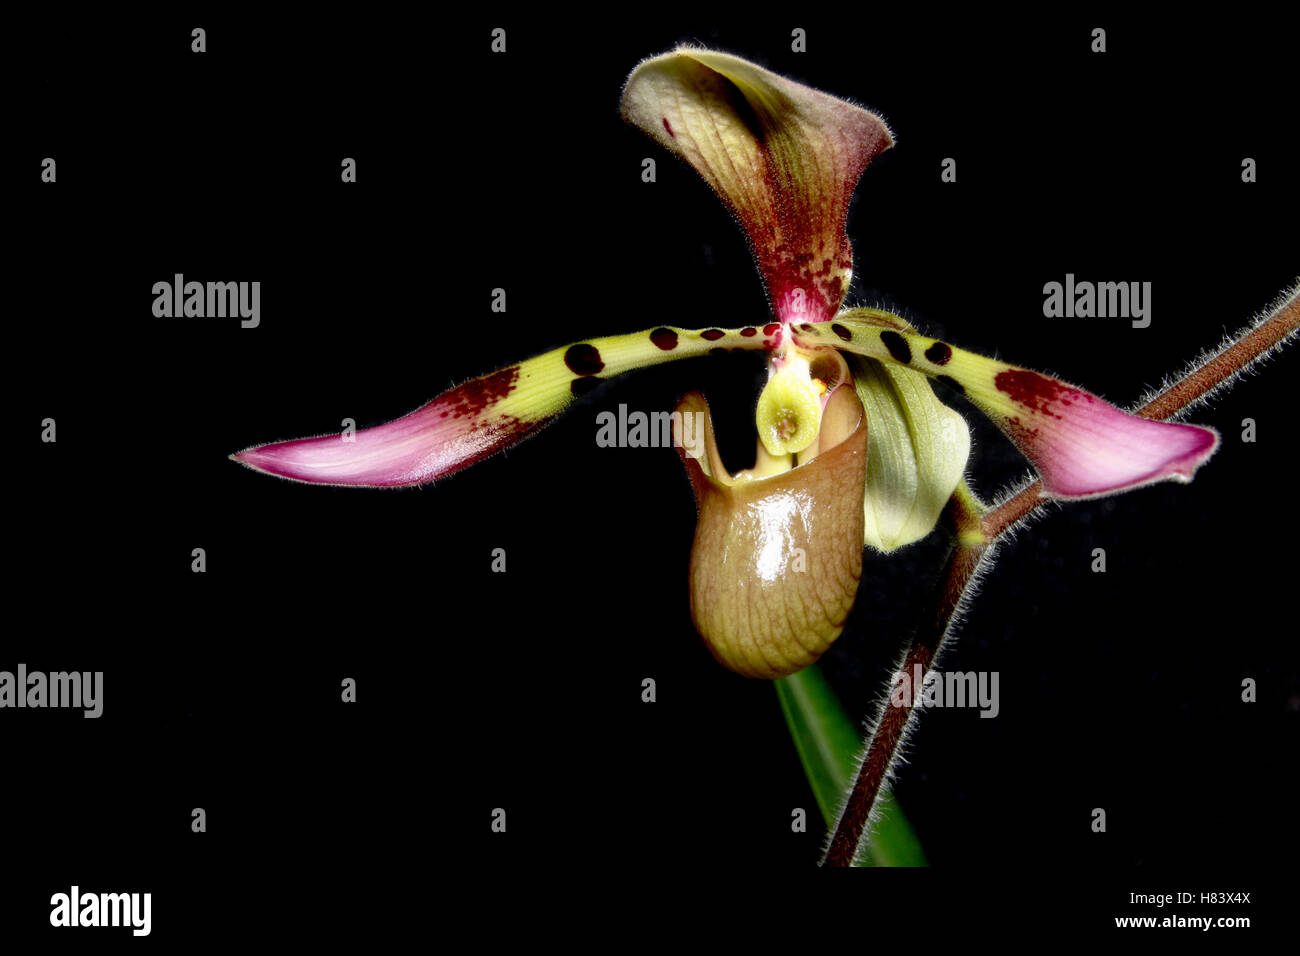 Lady Slipper Orchid. Lady’s Slipper Orchid. Paphiopedilum Toni Semple, lowii x haynaldianum. Orchid flower show. By the Miami Va Stock Photo